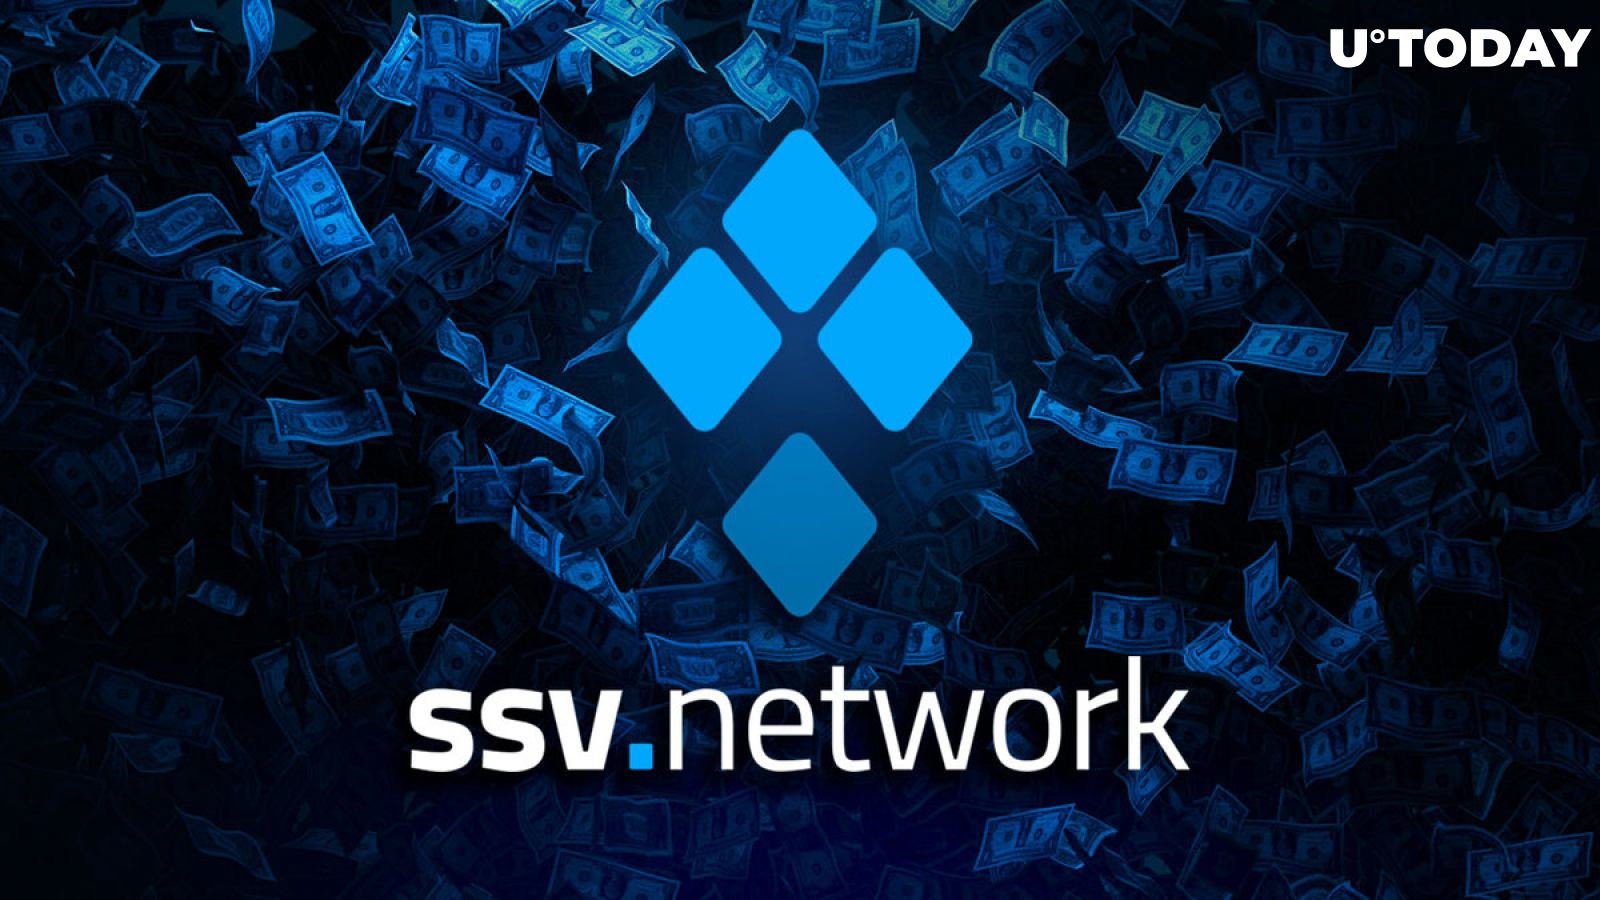 SSV.Network Logs $100 Million Staked, Validator Count Exceeds 2,000